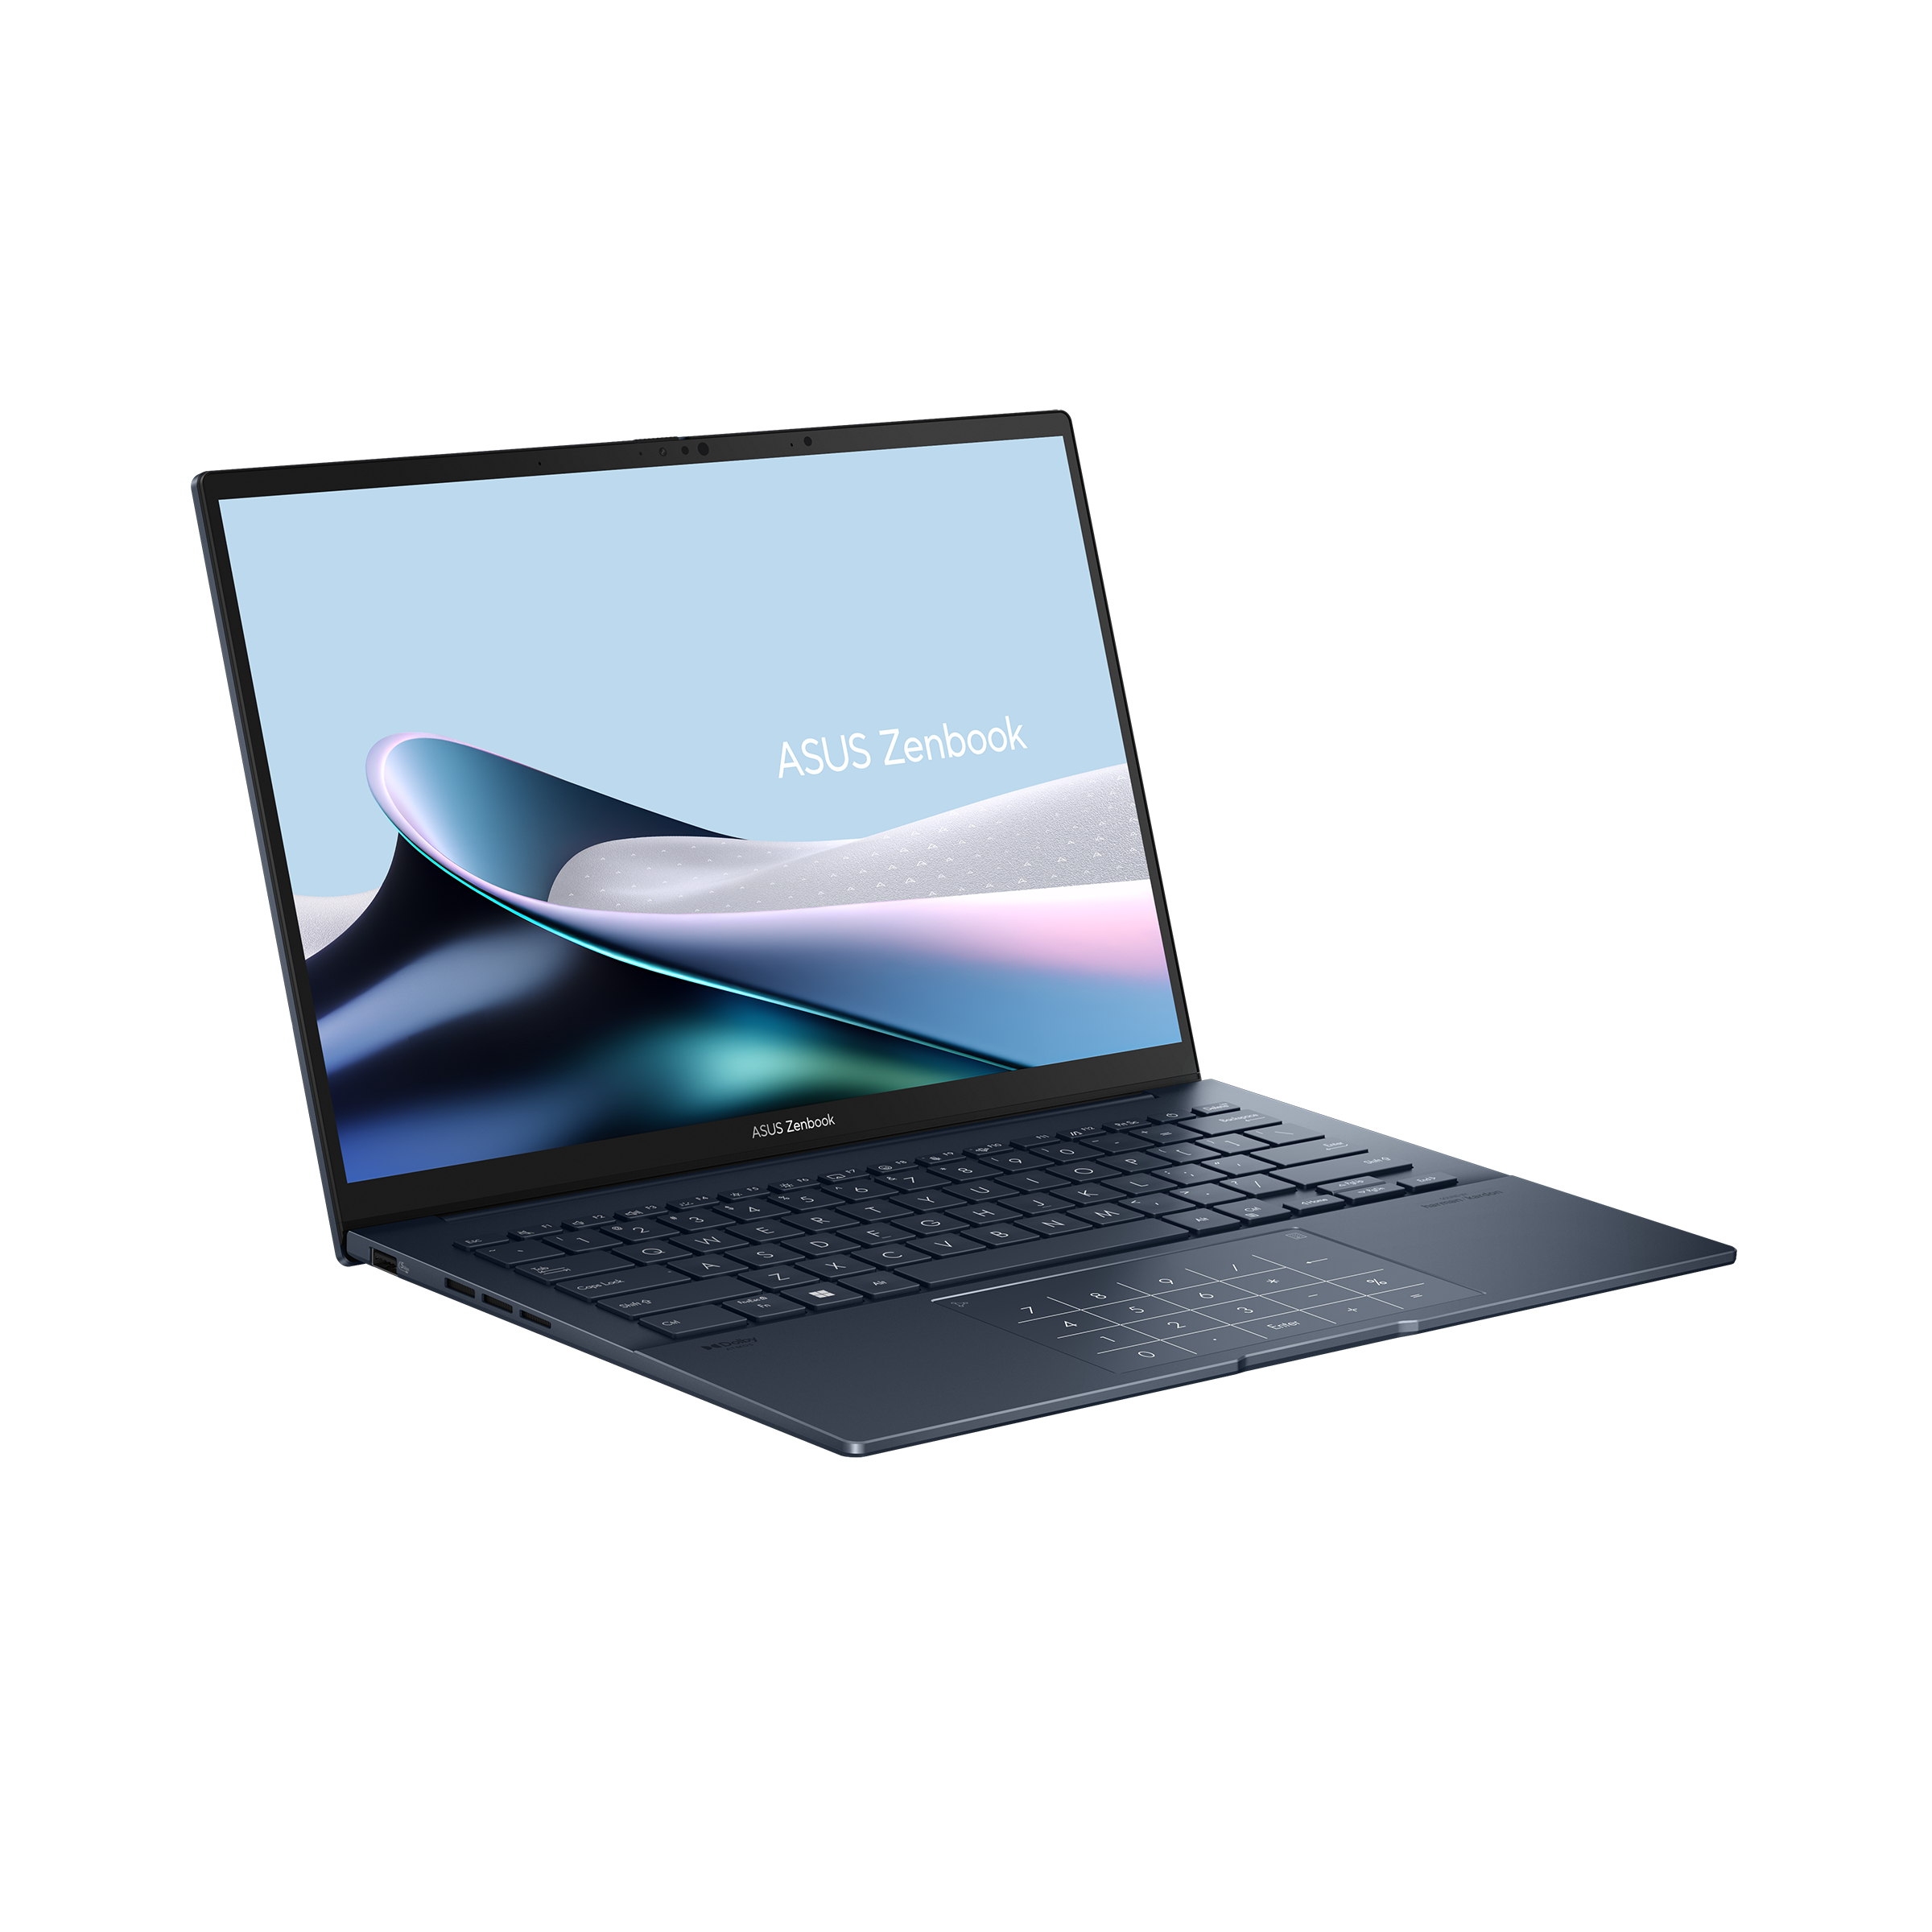 Asus Zenbook 14 OLED is a great thin-and-light, despite Intel's new chip